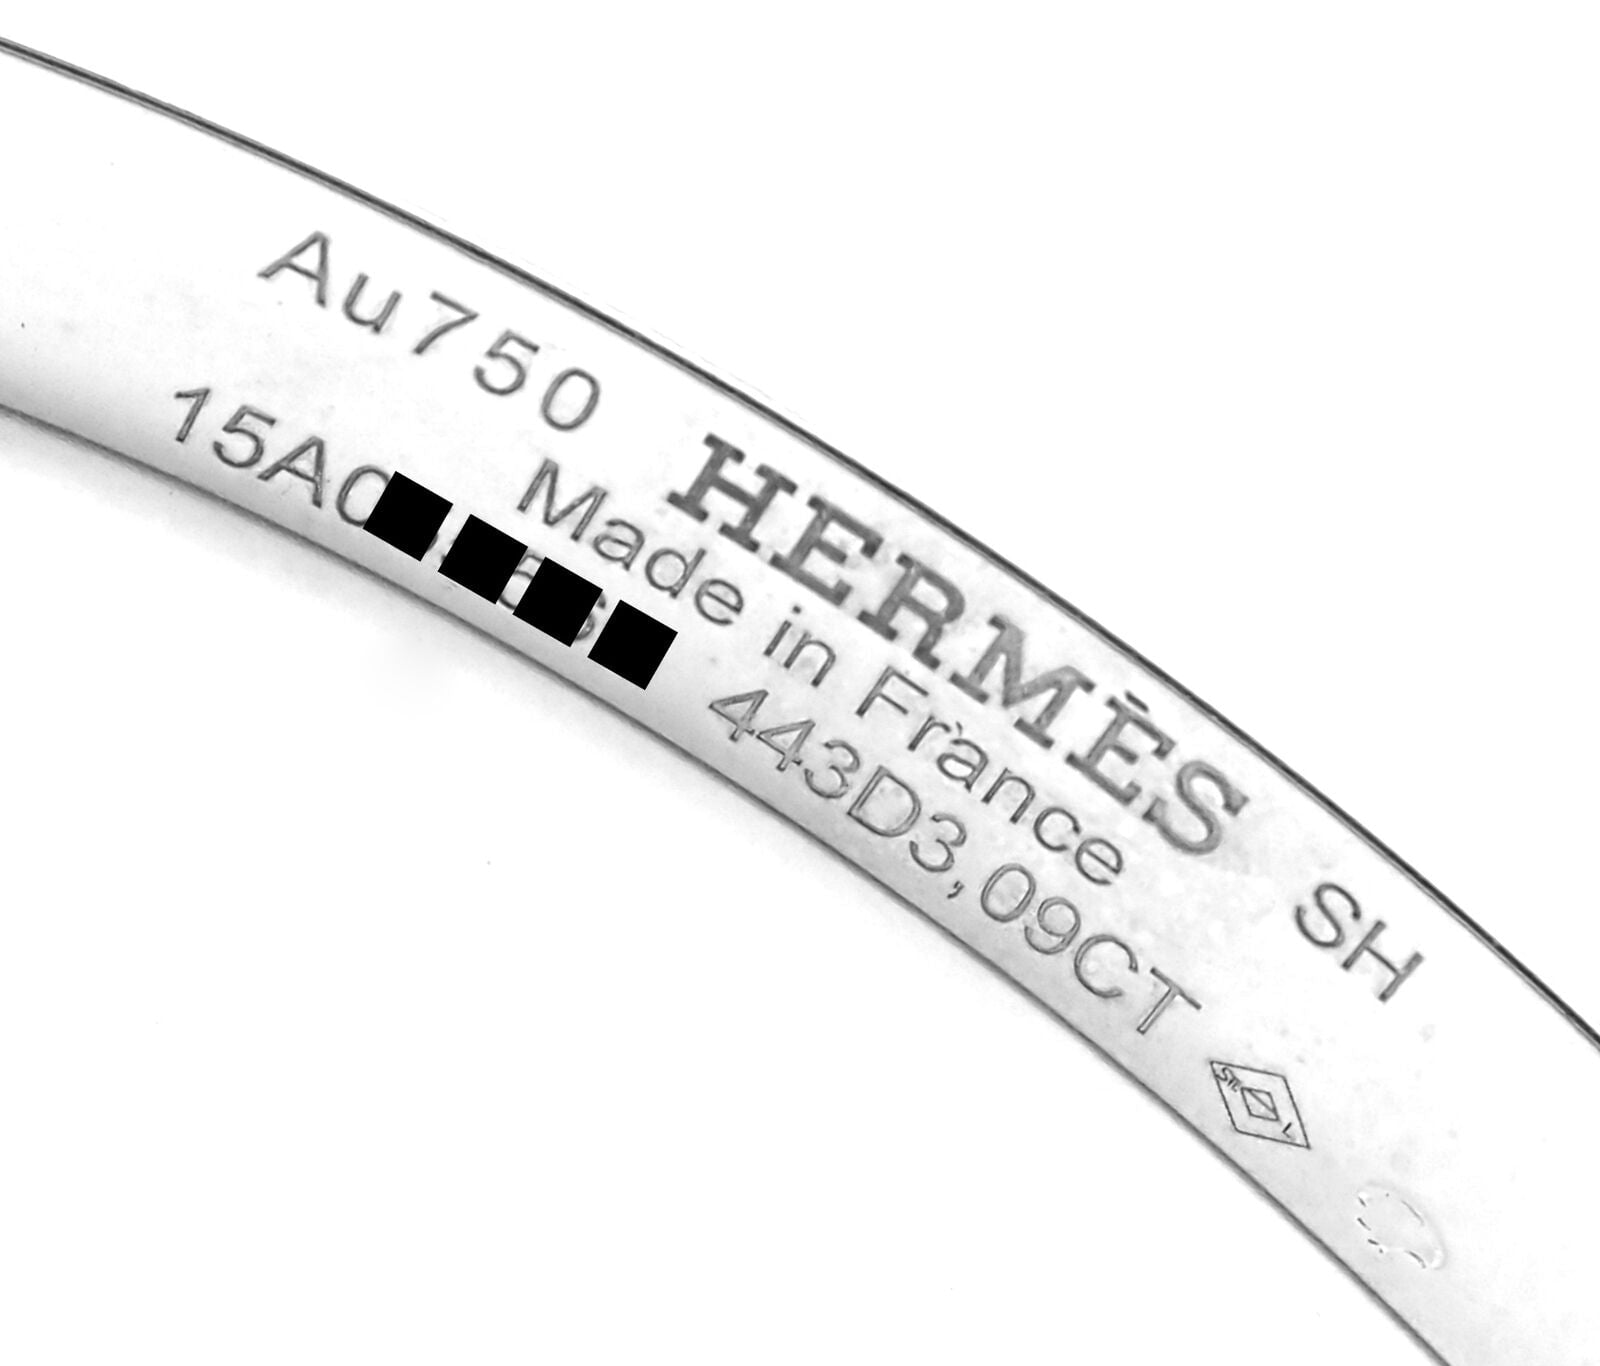 Hermes Jewelry & Watches:Fine Jewelry:Bracelets & Charms Authentic! Hermes H D'Ancre 18k White Gold Diamond Small Model Bangle Bracelet